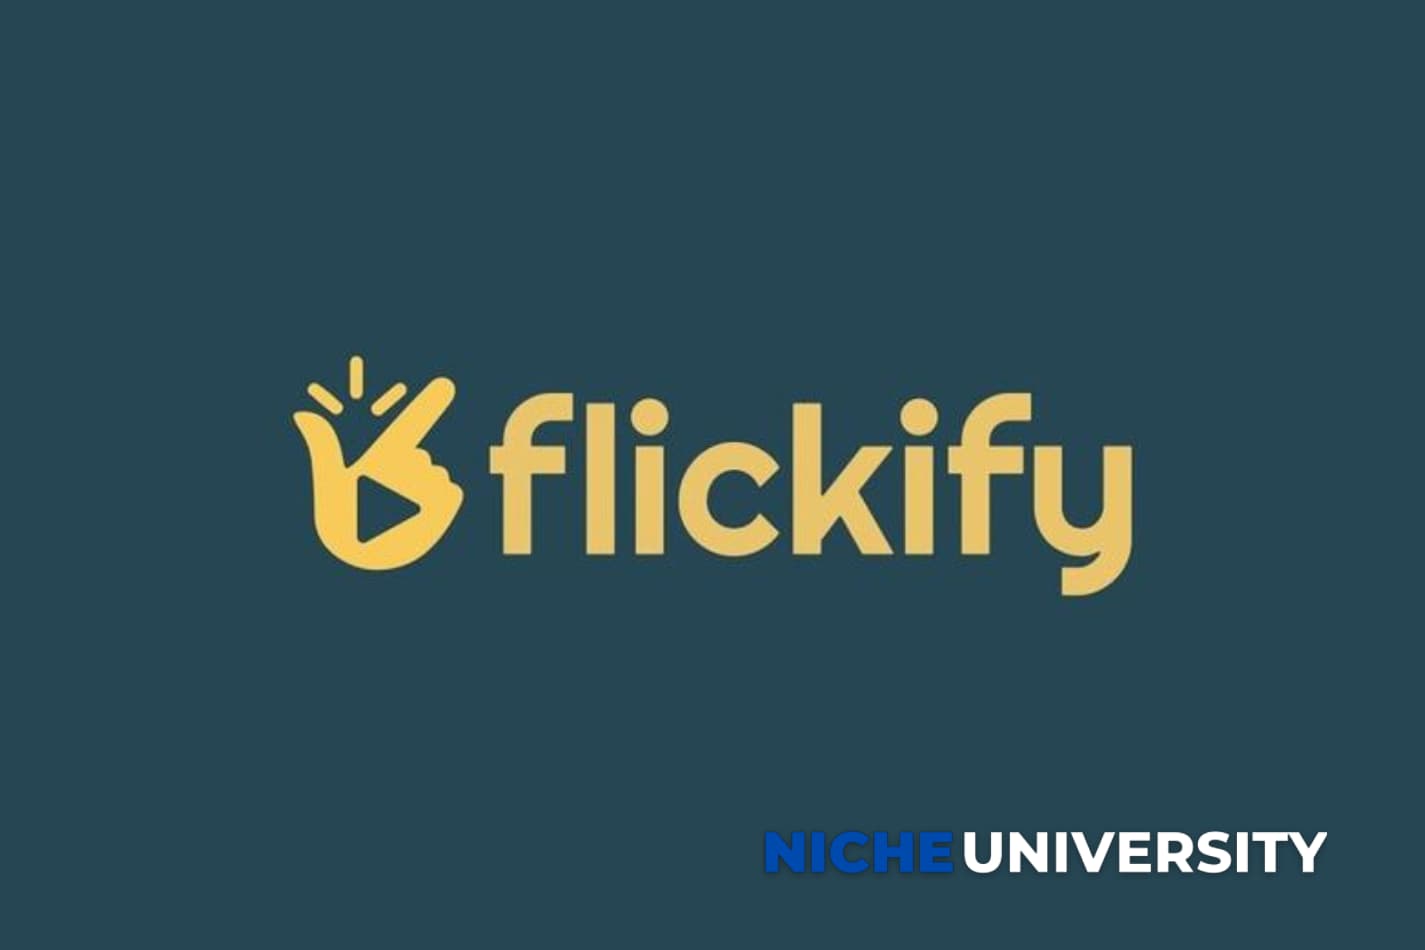 Flickify: Converting Written Content Into Spoken Video